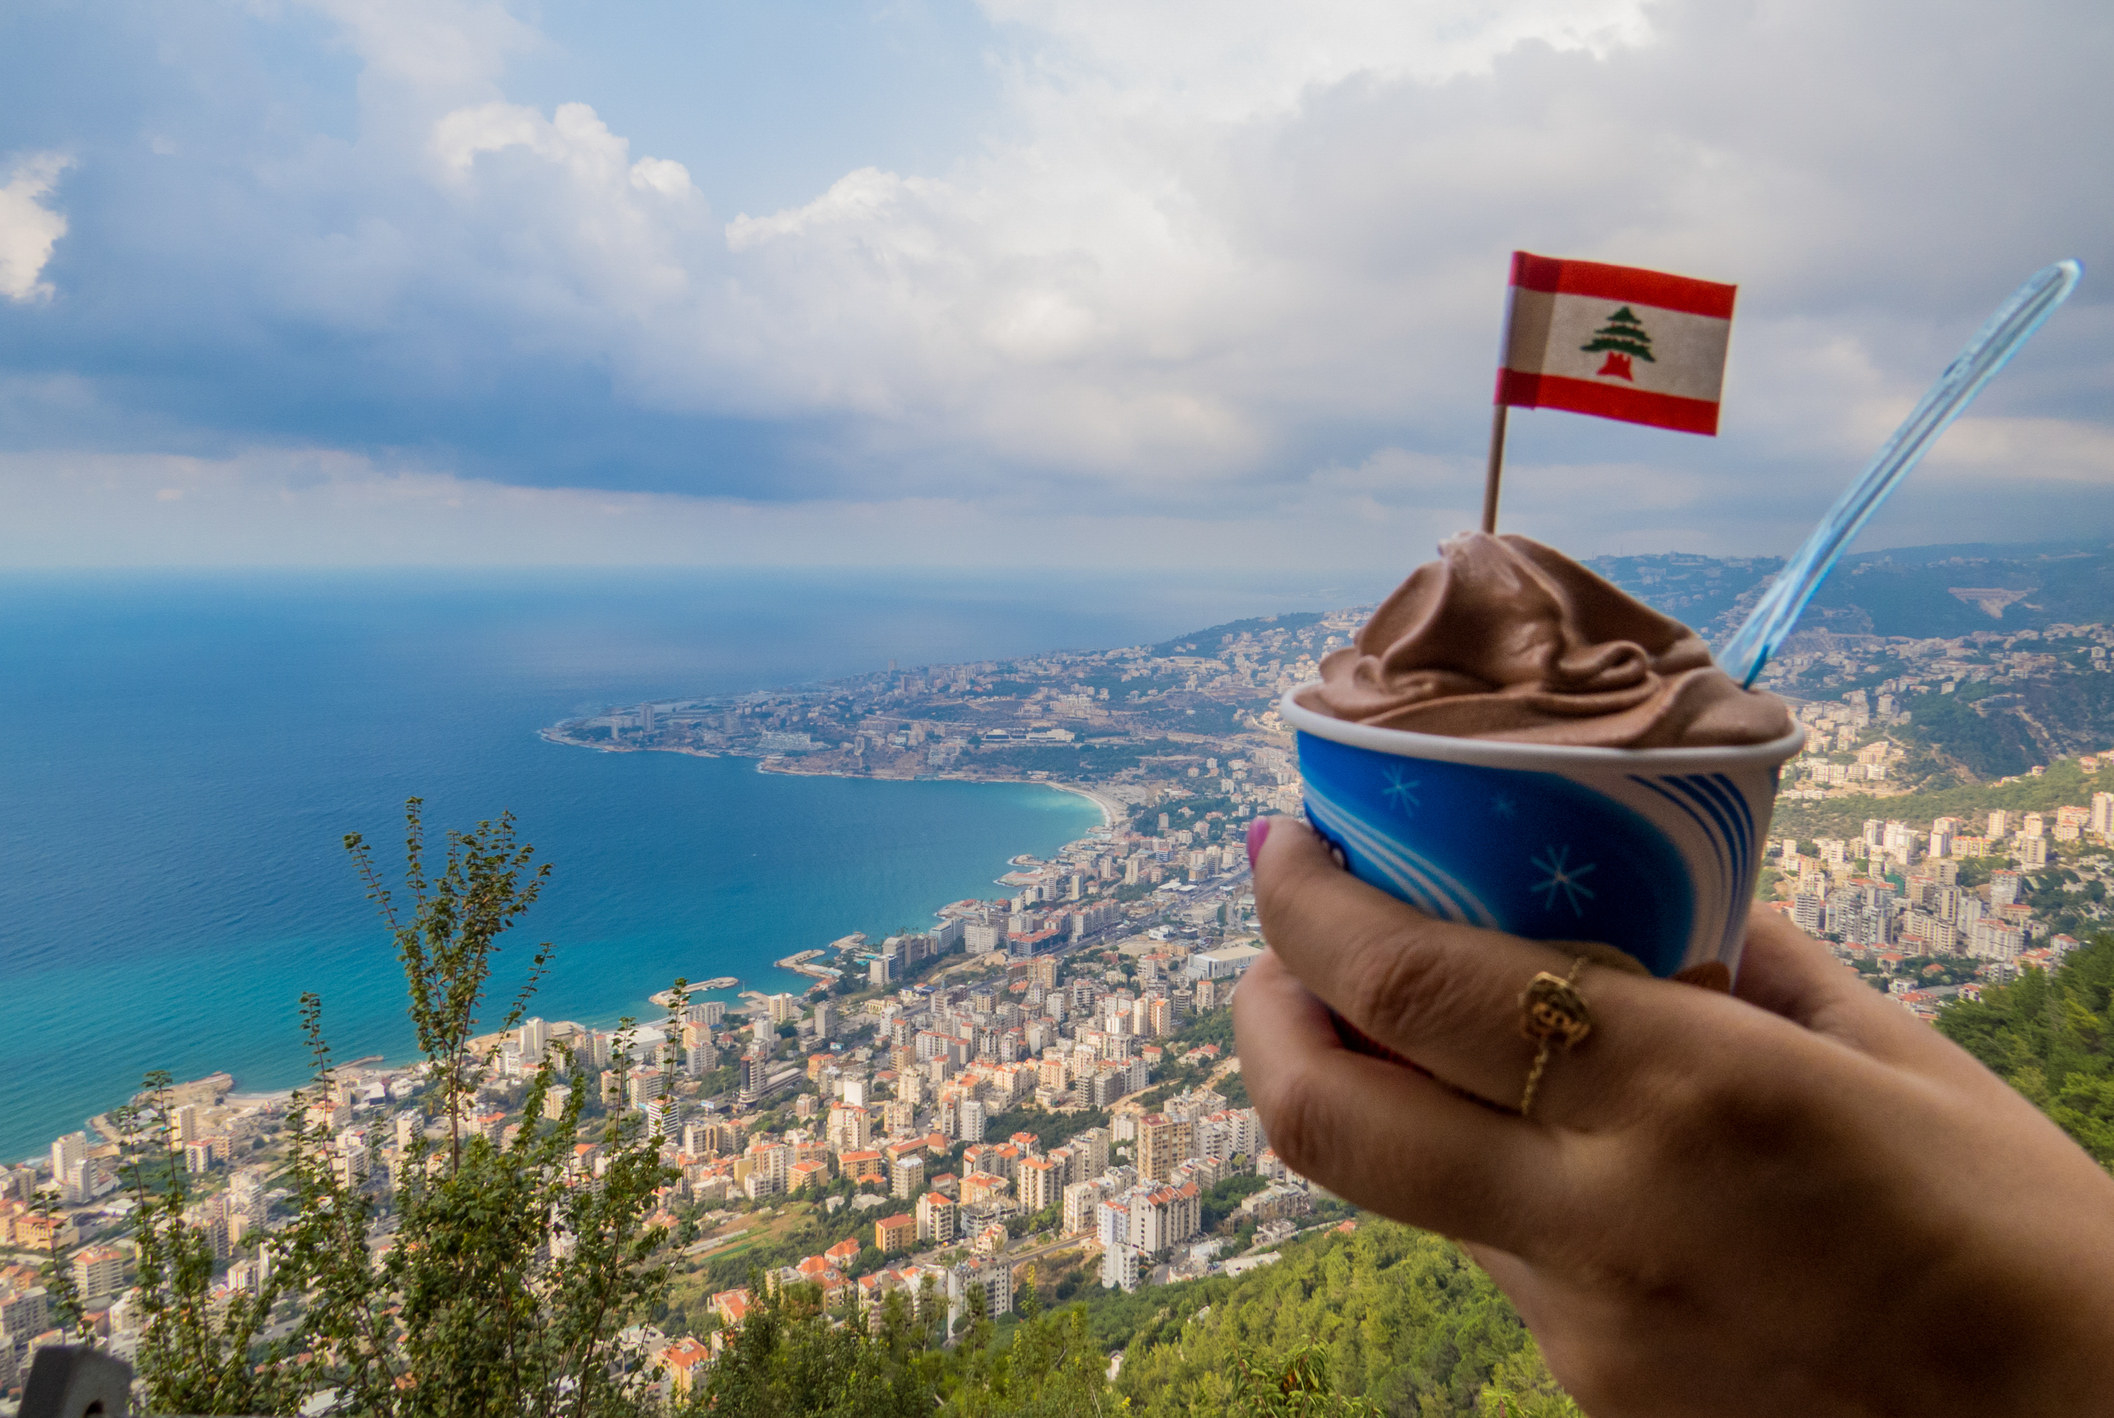 Chocolate ice cream and a view of Lebanon.